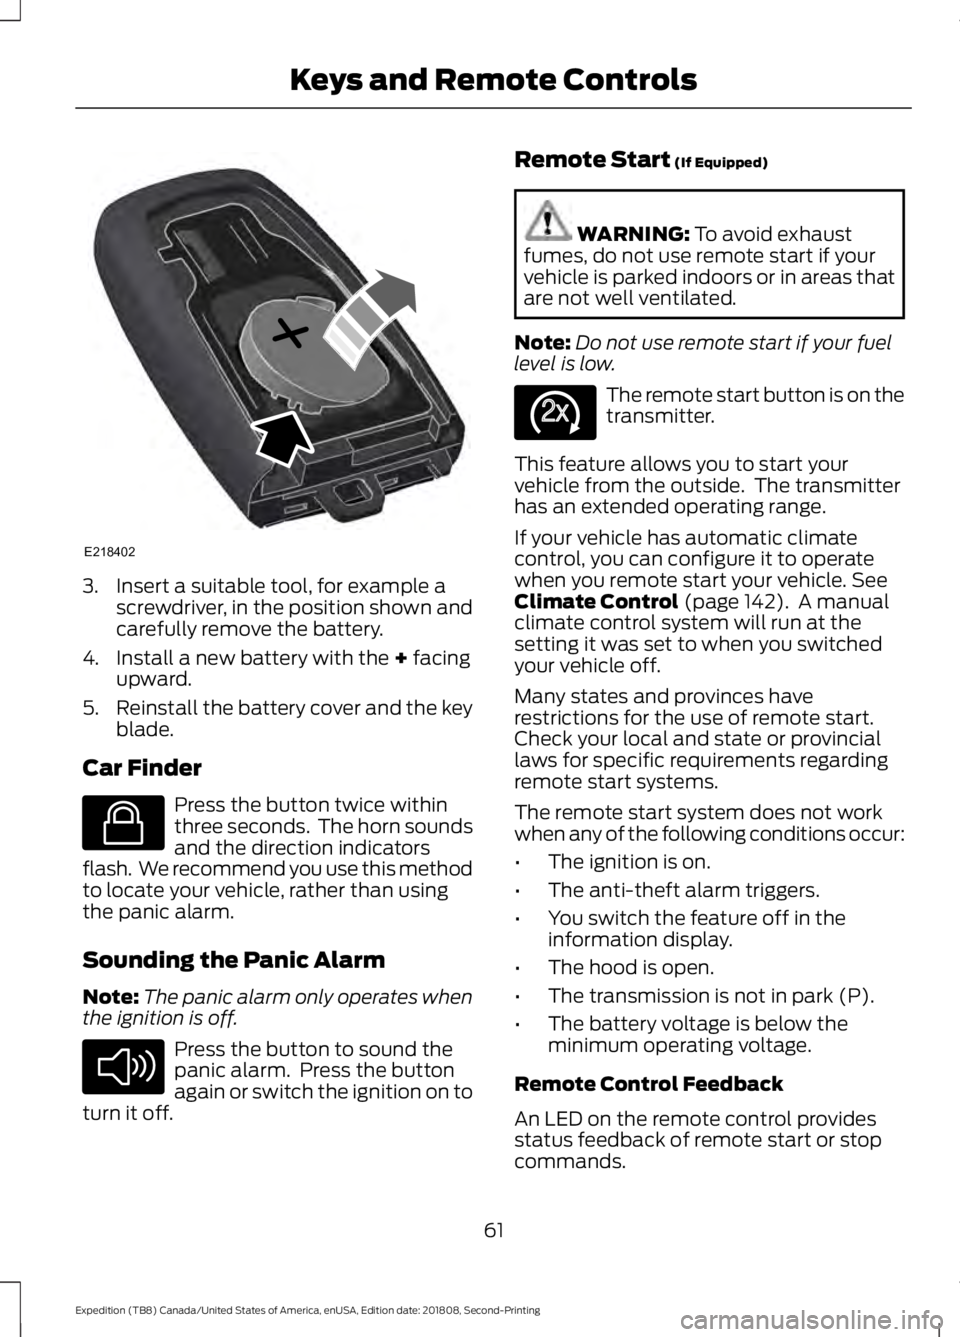 FORD EXPEDITION 2019  Owners Manual 3. Insert a suitable tool, for example a
screwdriver, in the position shown and
carefully remove the battery.
4. Install a new battery with the + facing
upward.
5. Reinstall the battery cover and the 